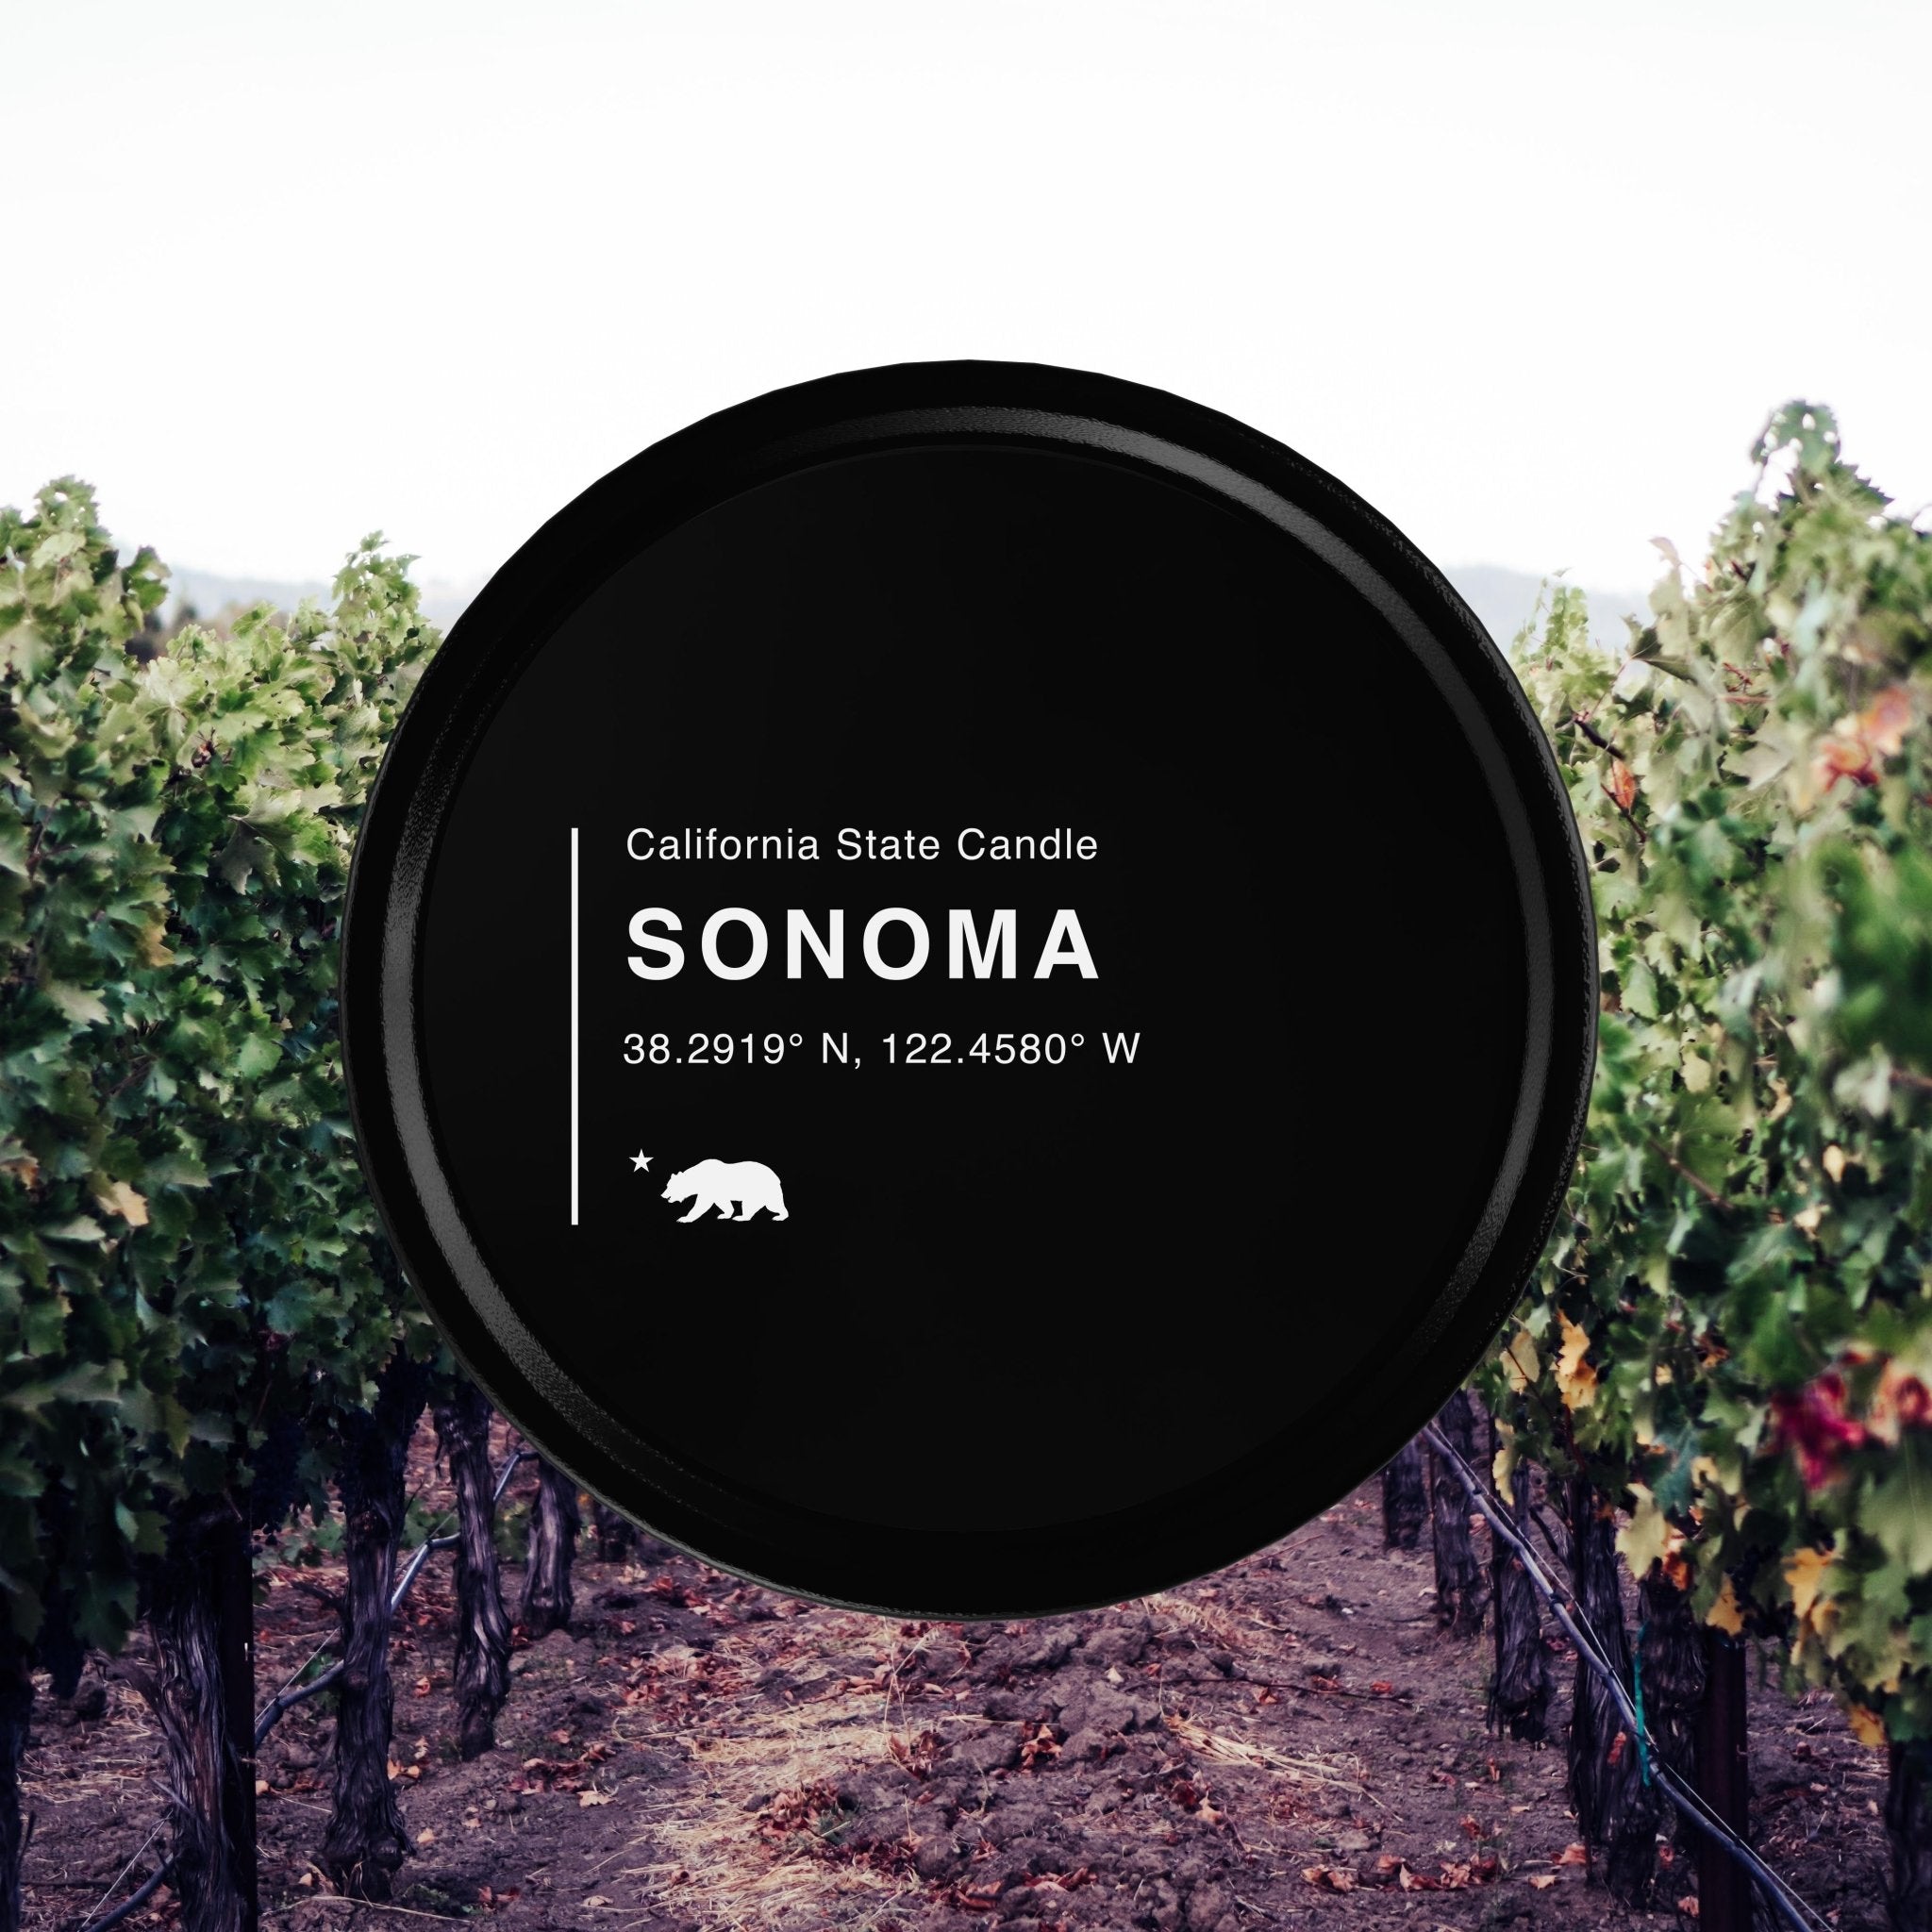 Sonoma California Scented Travel Tin Candle - Candlefy